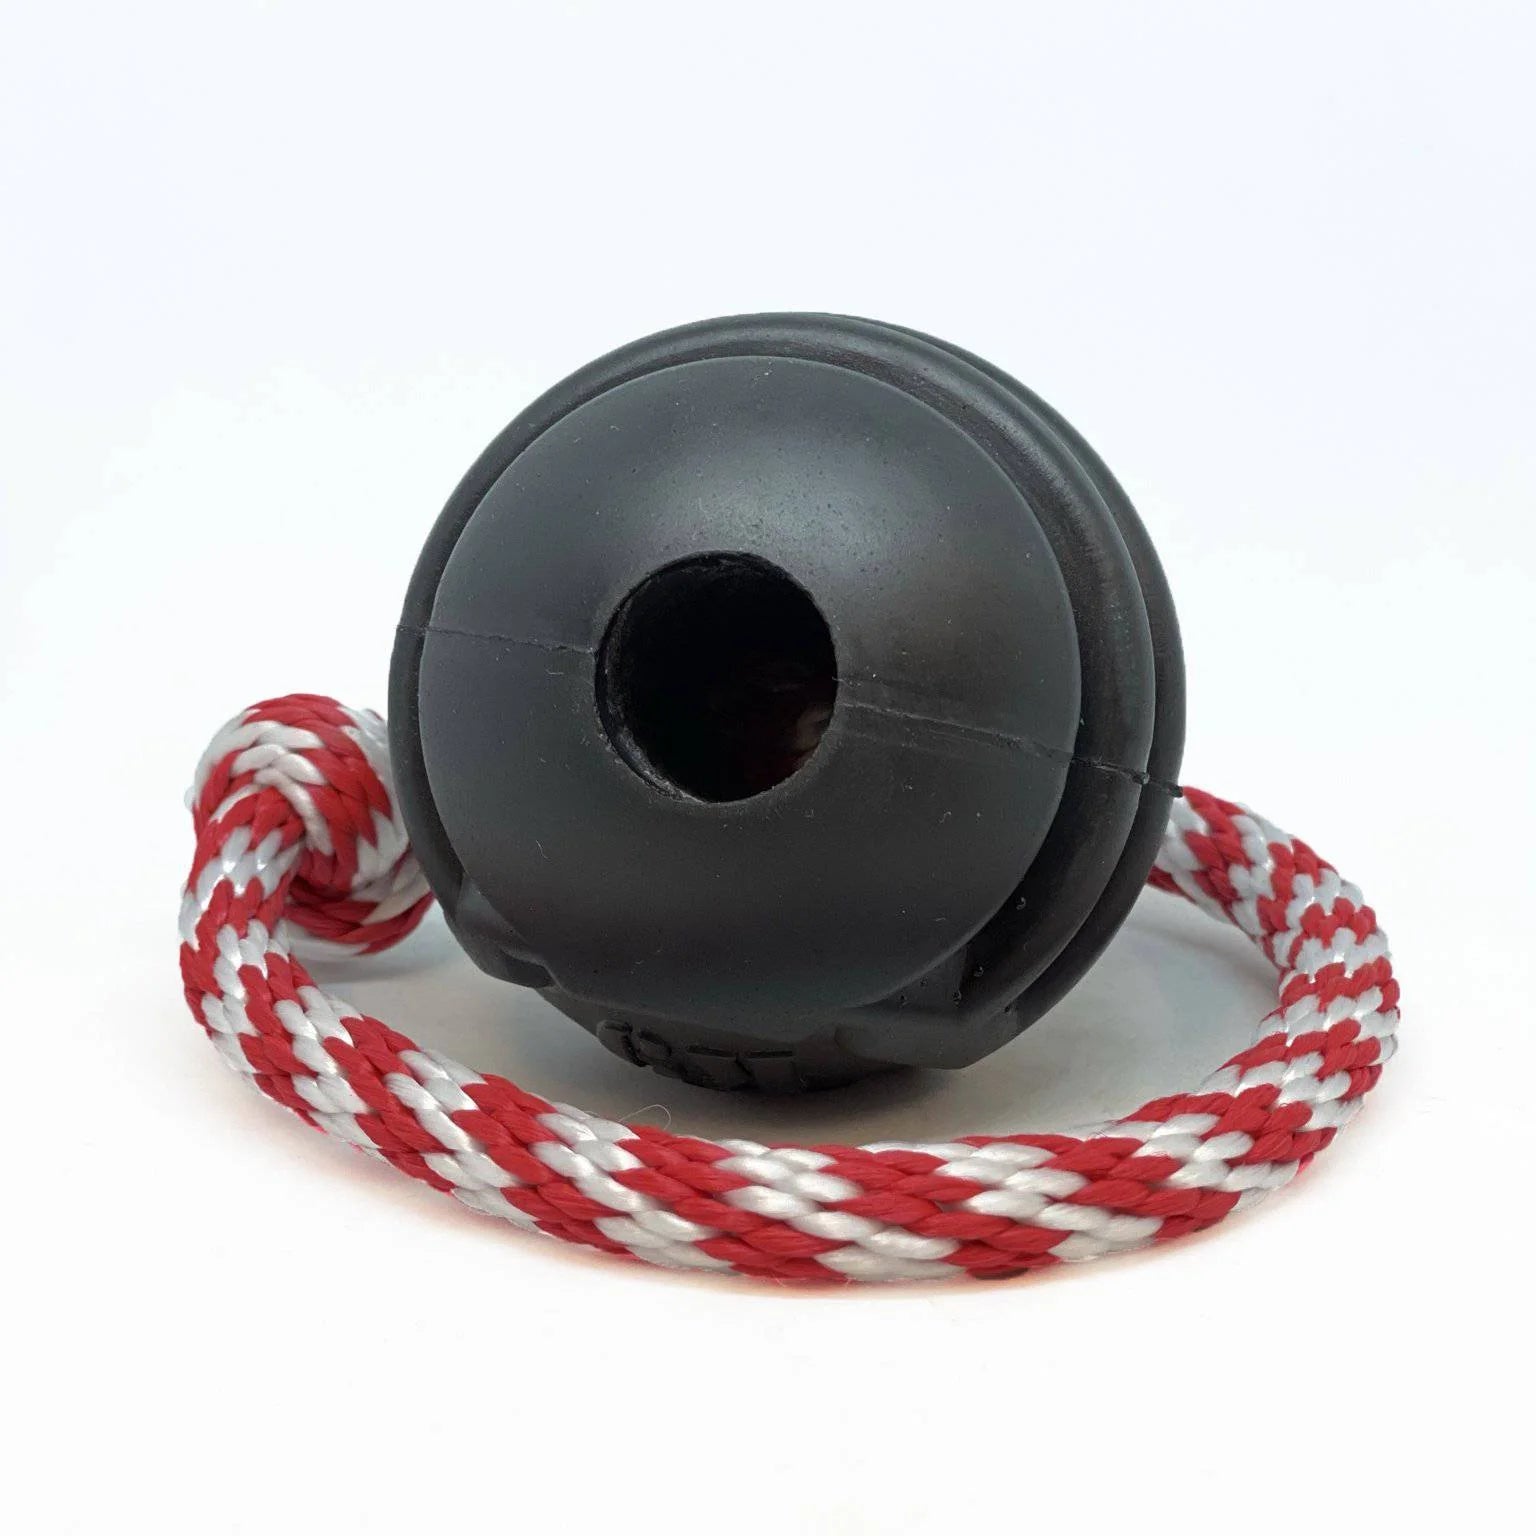 SODAPUP STARS AND STRIPES TUG TOY BLACK